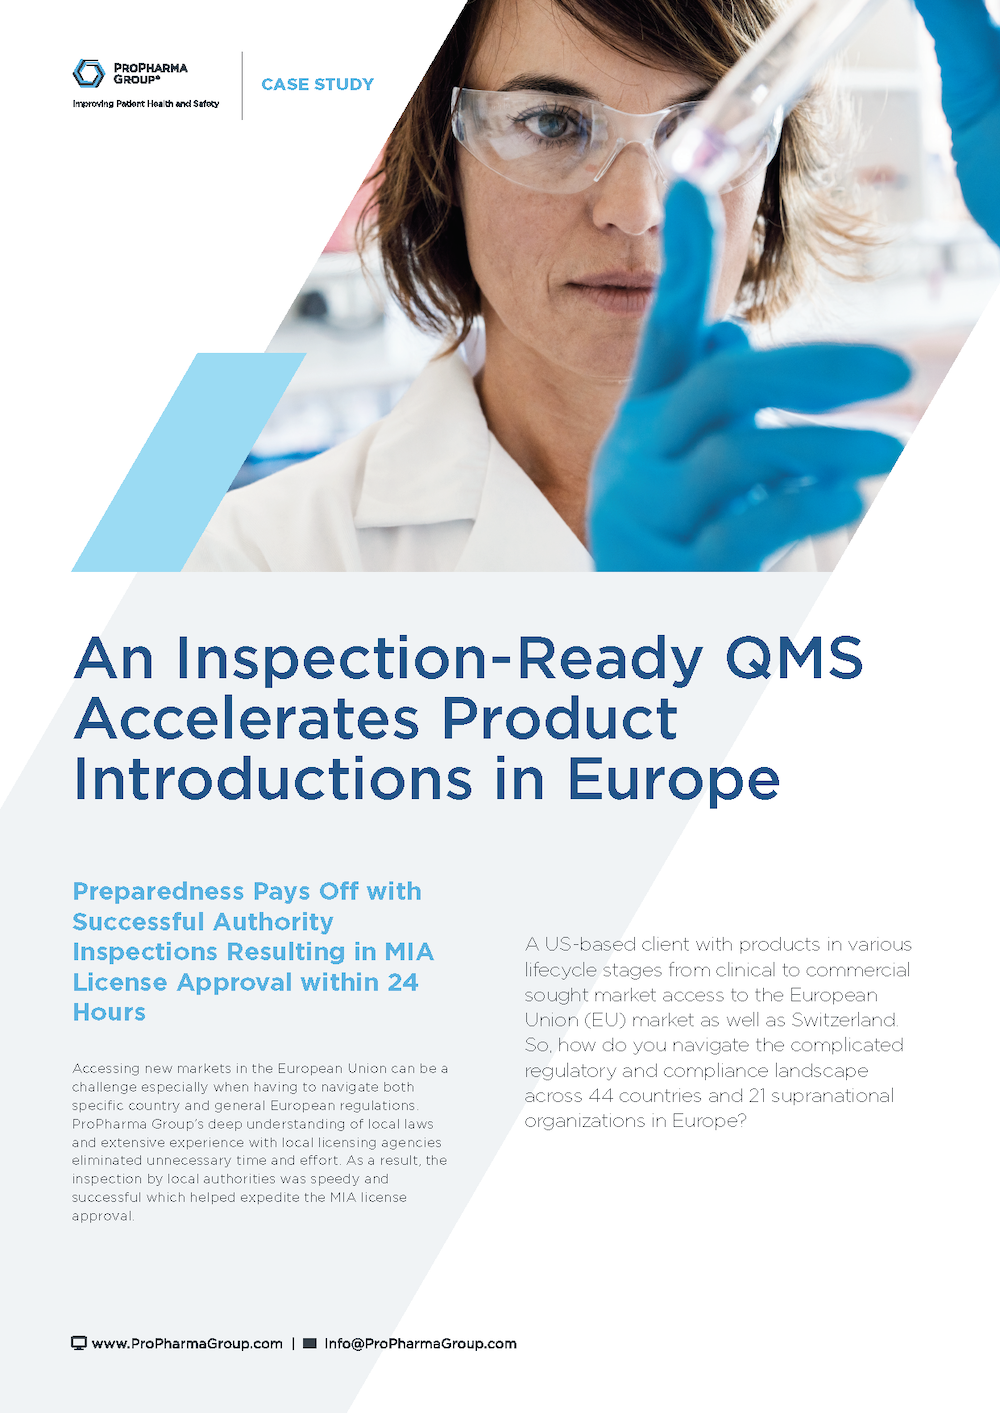 An Inspection-Ready QMS Accelerates Product Introductions in Europe